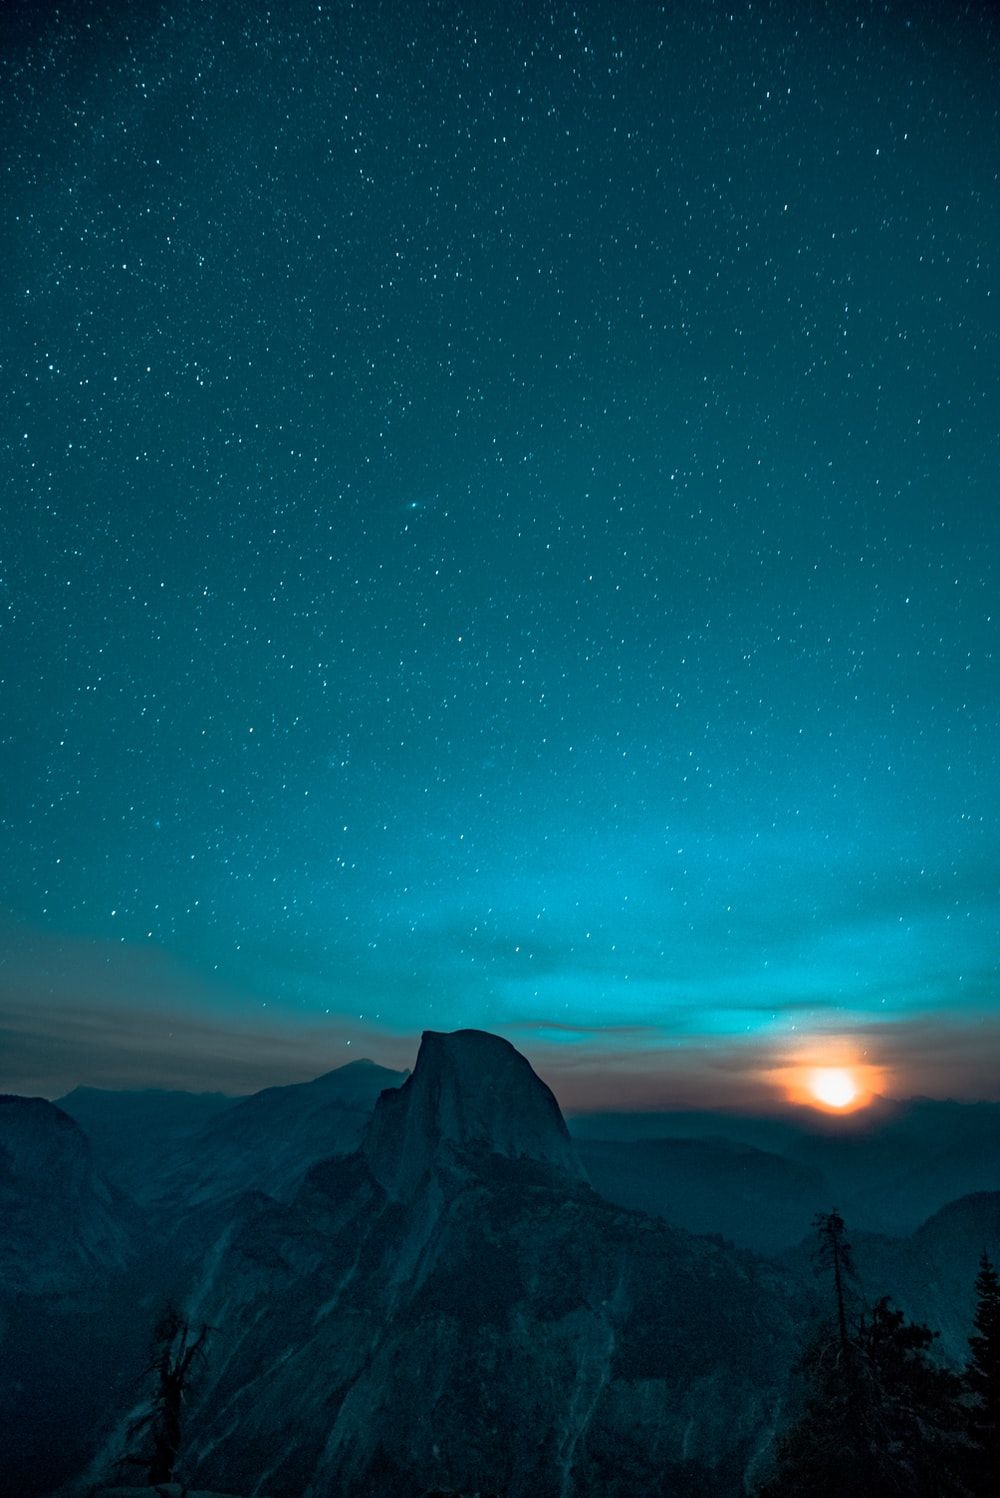 Stunning Mountain Star Landscape Night Sky Picture